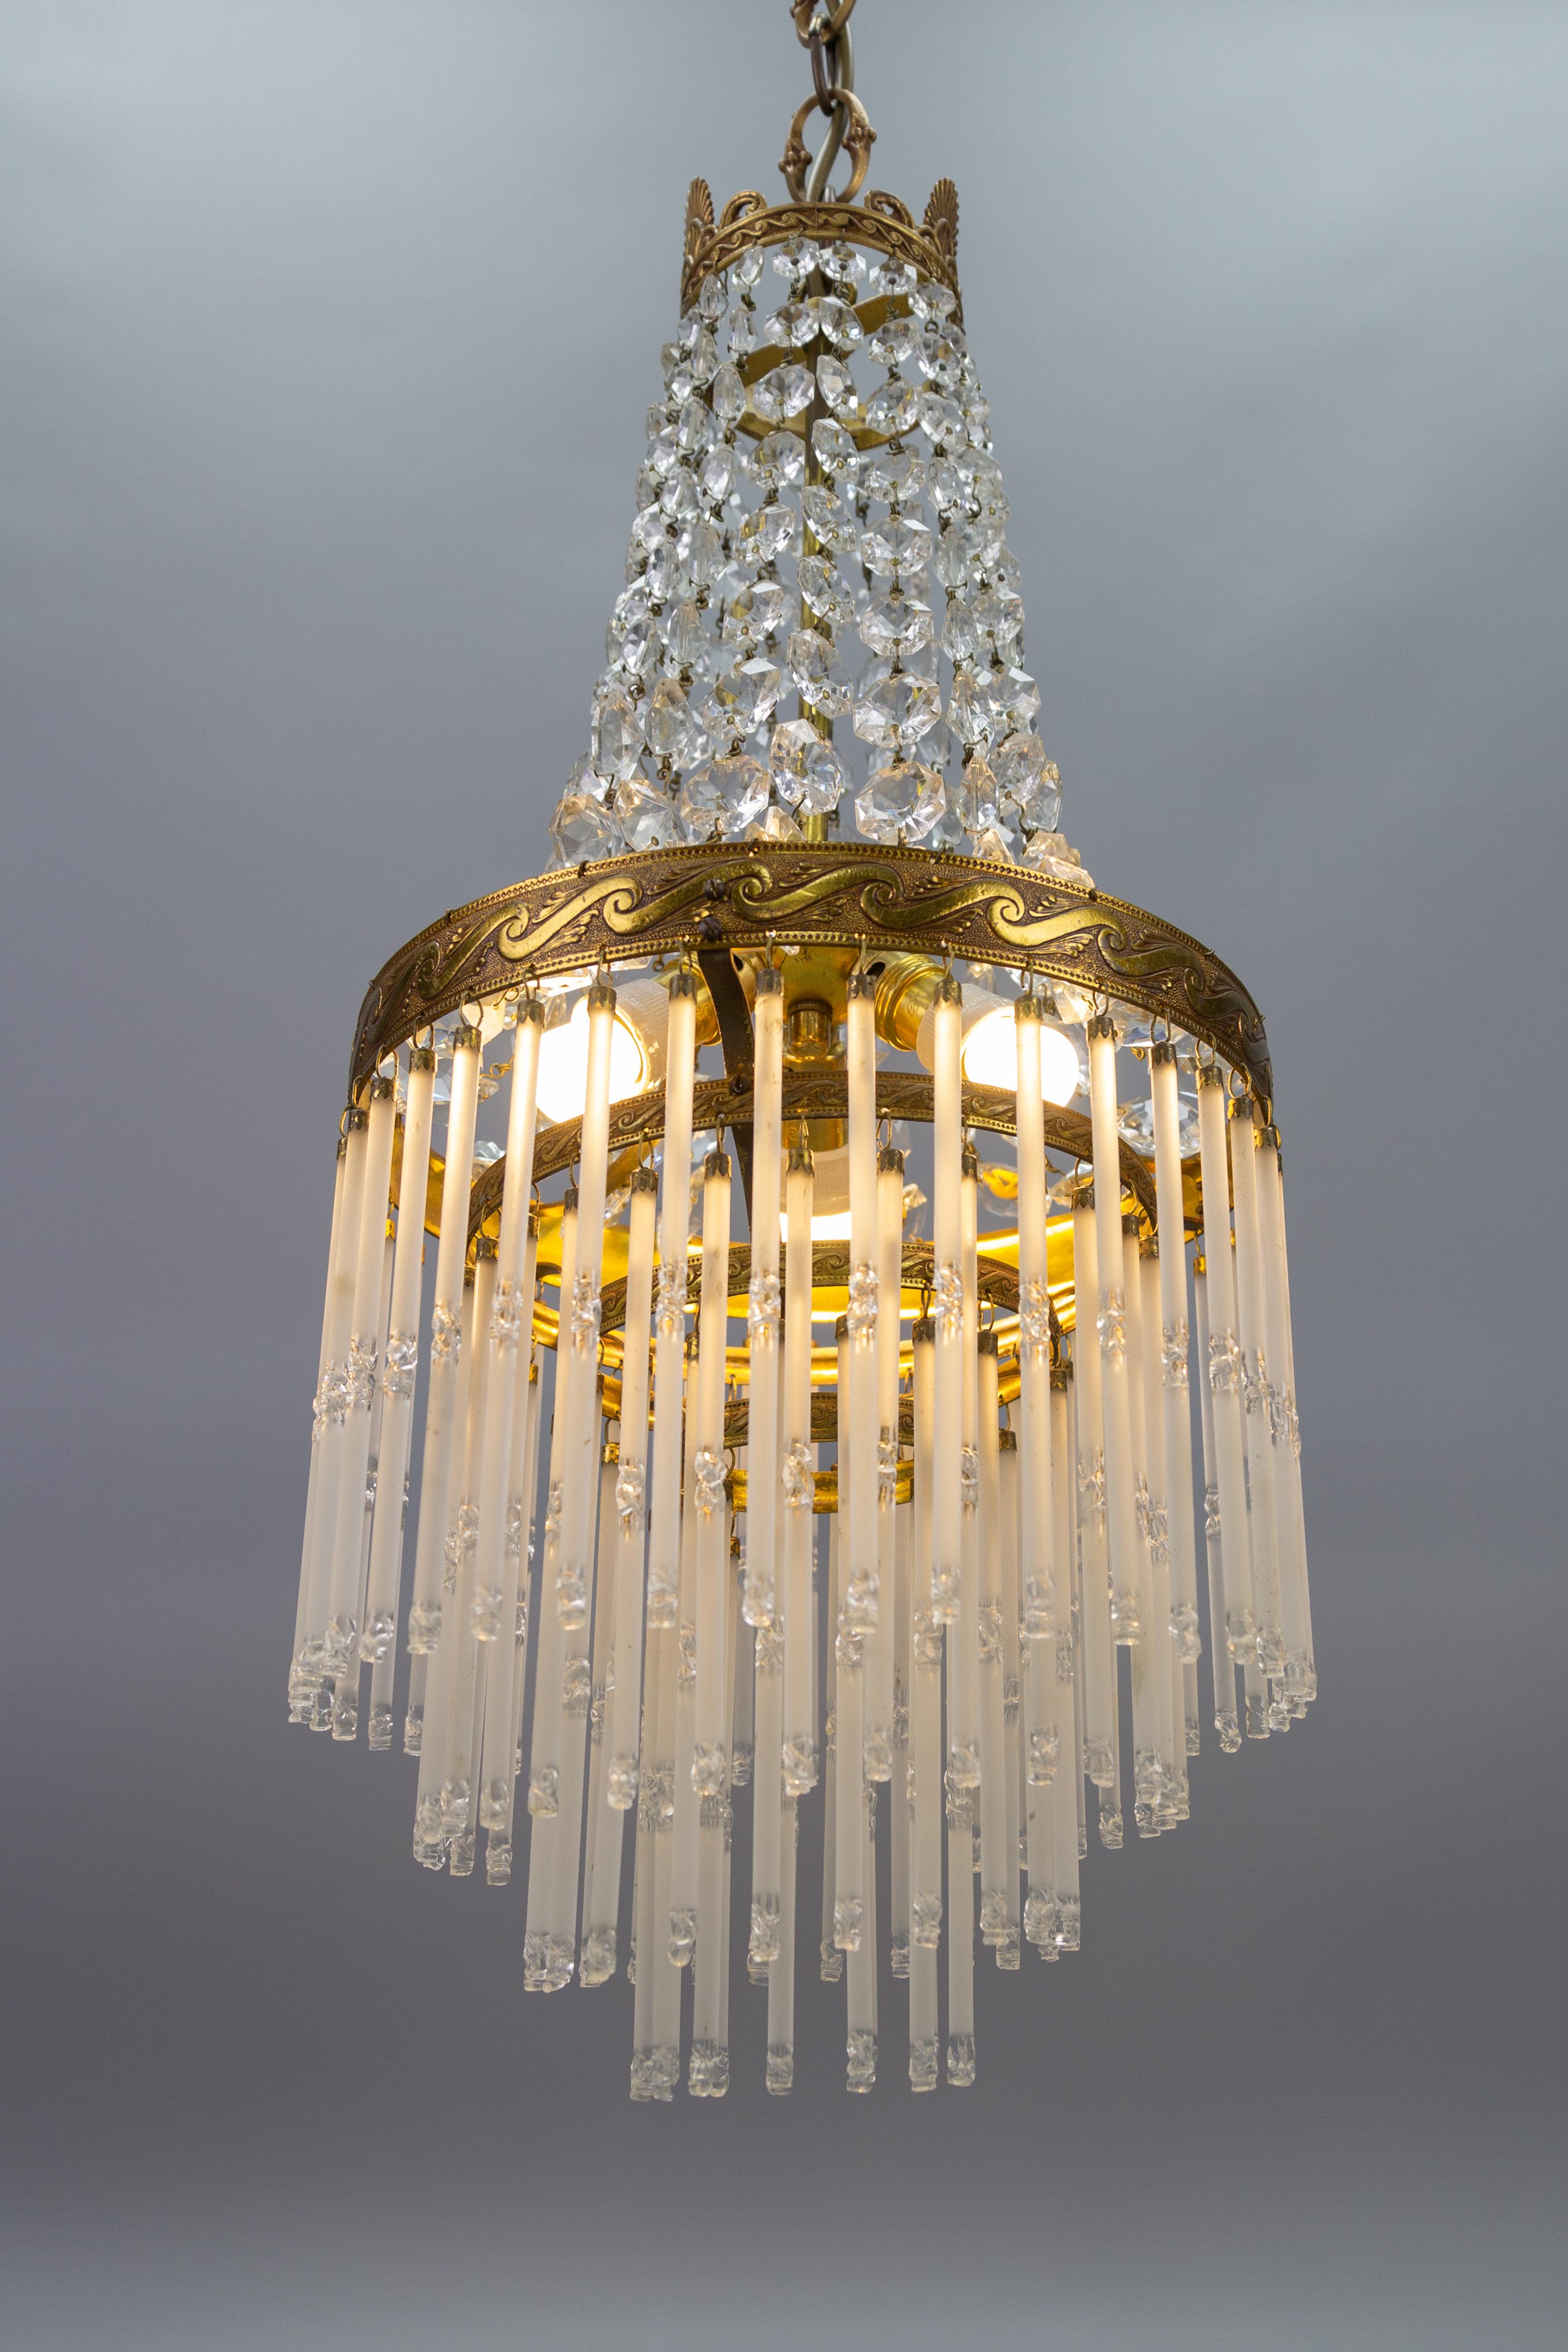 Mid-20th Century French Art Deco Style Crystal Glass and Glass Rods Three-Light Brass Chandelier